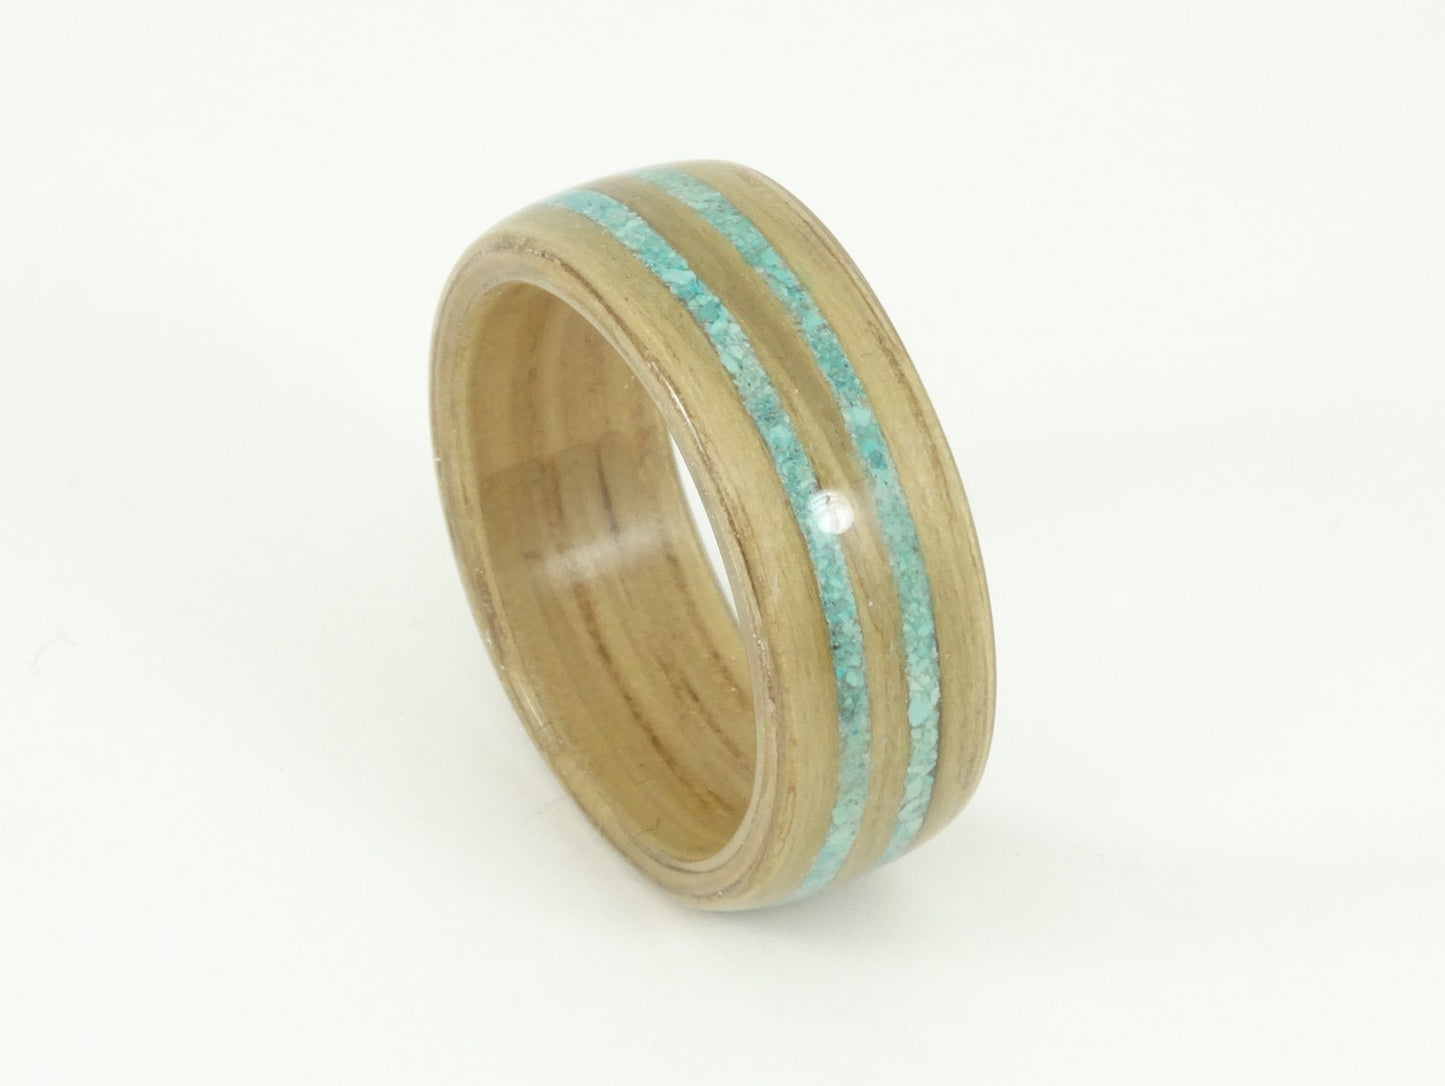 Oak with Double Turquoise Inlay Bent Wood Ring